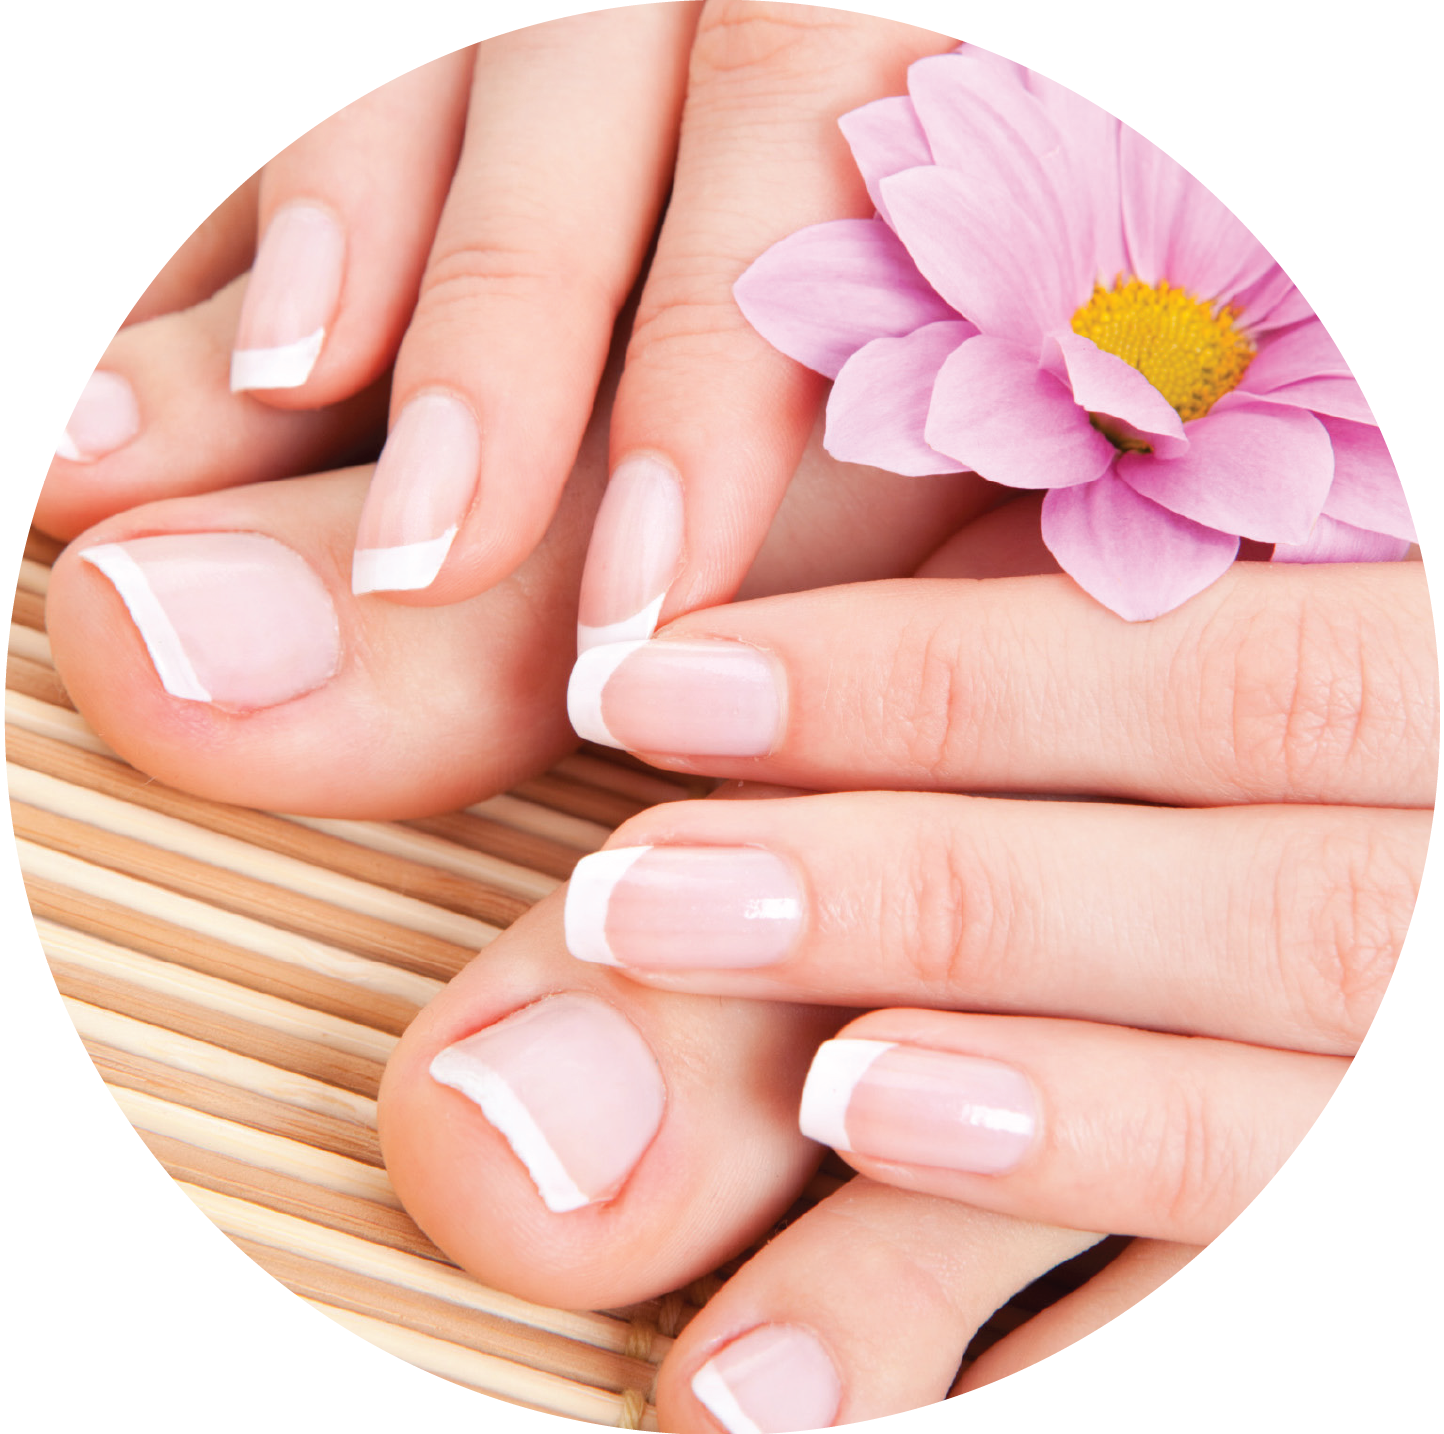 Instant French Manicure & Pedicure Kit for $9.99